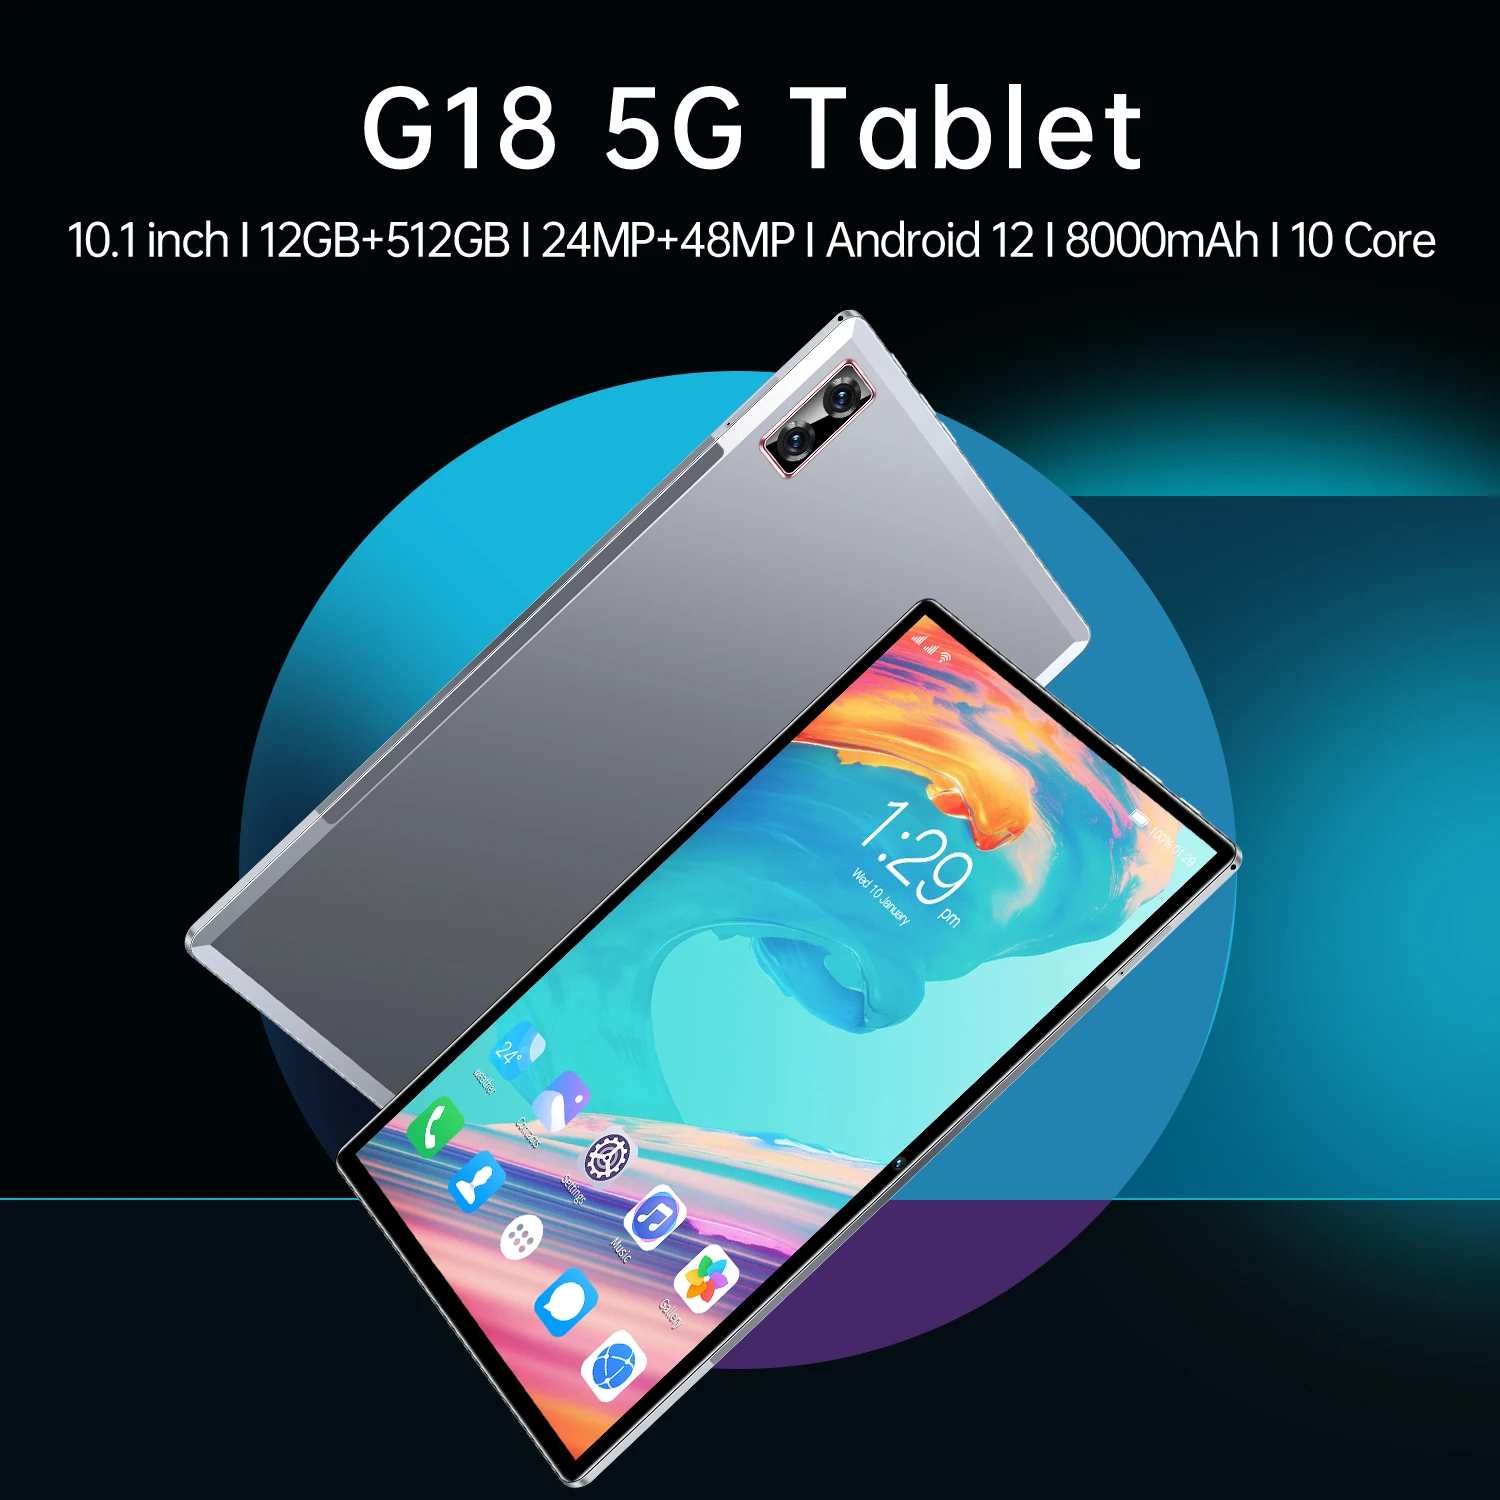 Hot Sales Tablet G18 GPS 8000mAh Google Play 12GB 512GB WIFI 10.1Inch Android 12 Laptop 48MP Deca Core 5G Pad Global Version PC